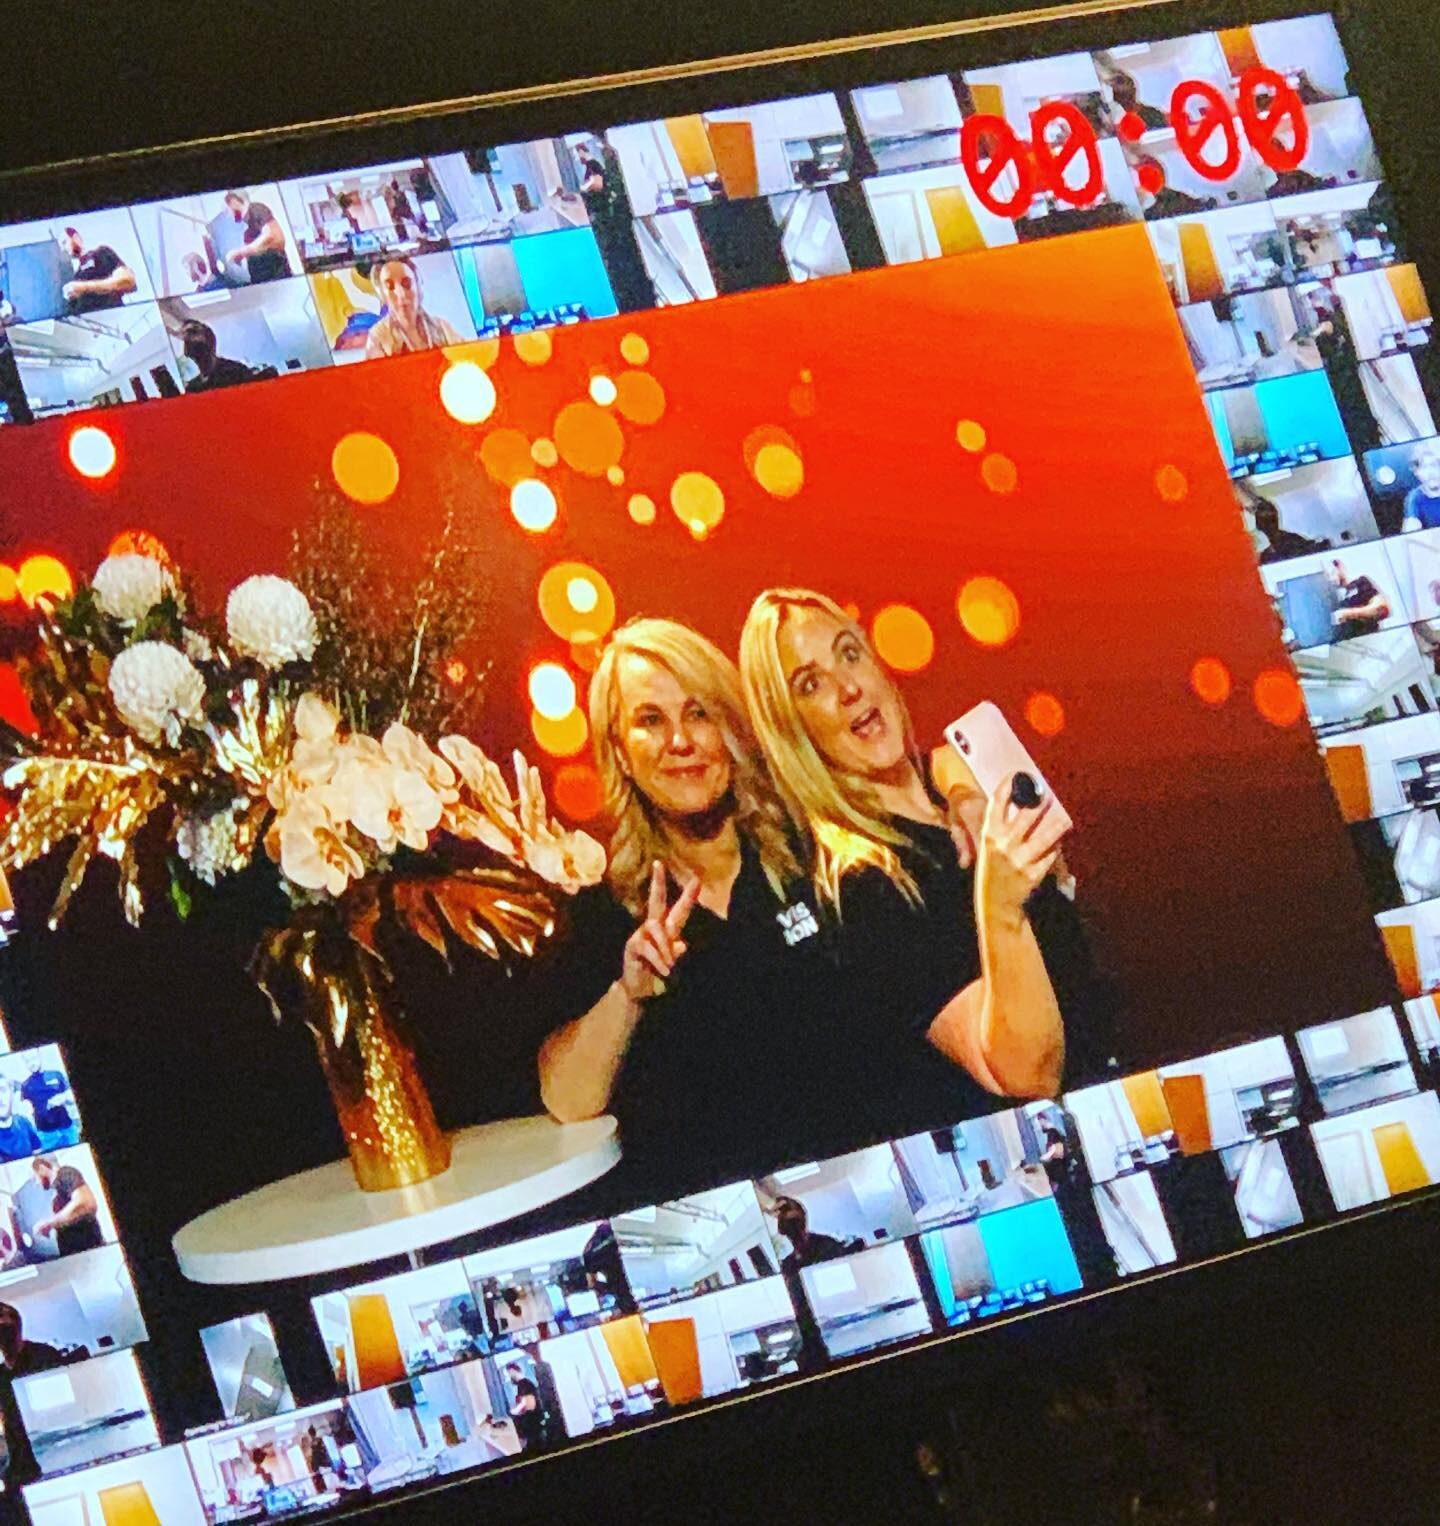 Always time for some fun during rehearsals @suzieqface. Incredible effort today by the Virtual Vision team producing the ANZ BD Awards 2020 virtual event. #redefined #events #virtualevents #livestreaming #webinar #custom #eventprofs #eventspecialists